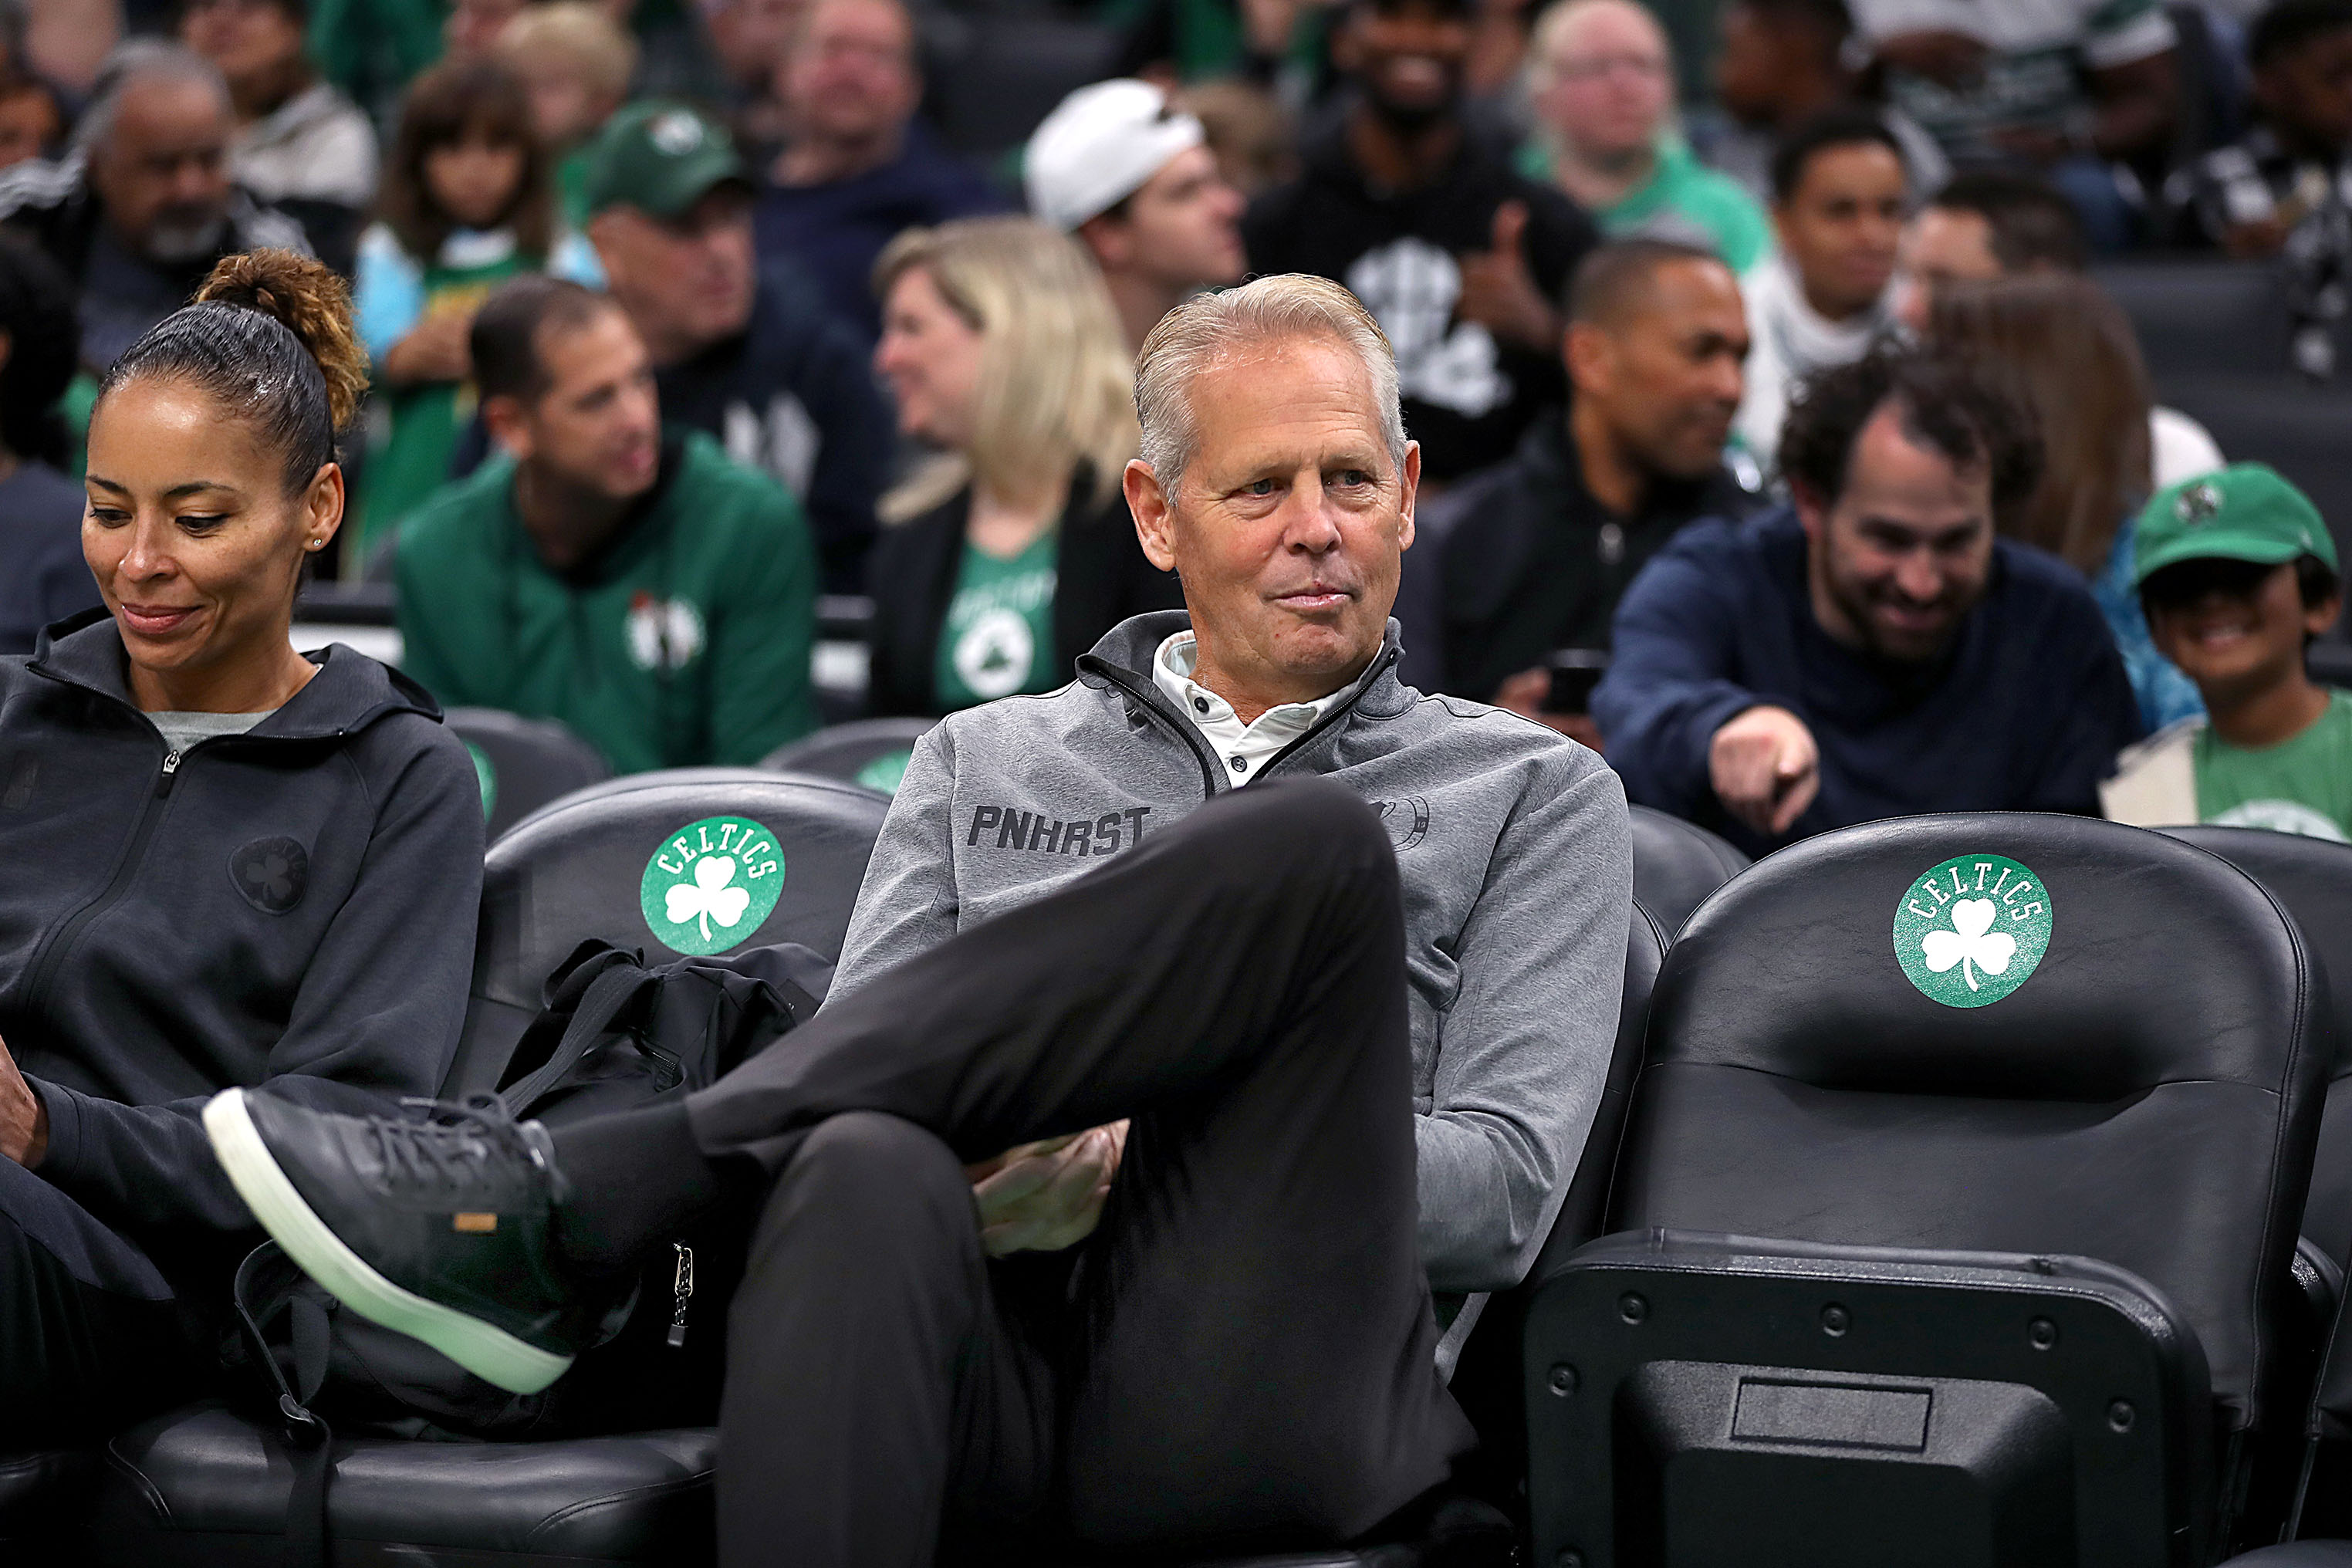 Former Boston Celtics president of basketball operations Danny Ainge watches during an open practice at TD Garden in Boston on Oct. 5, 2019.